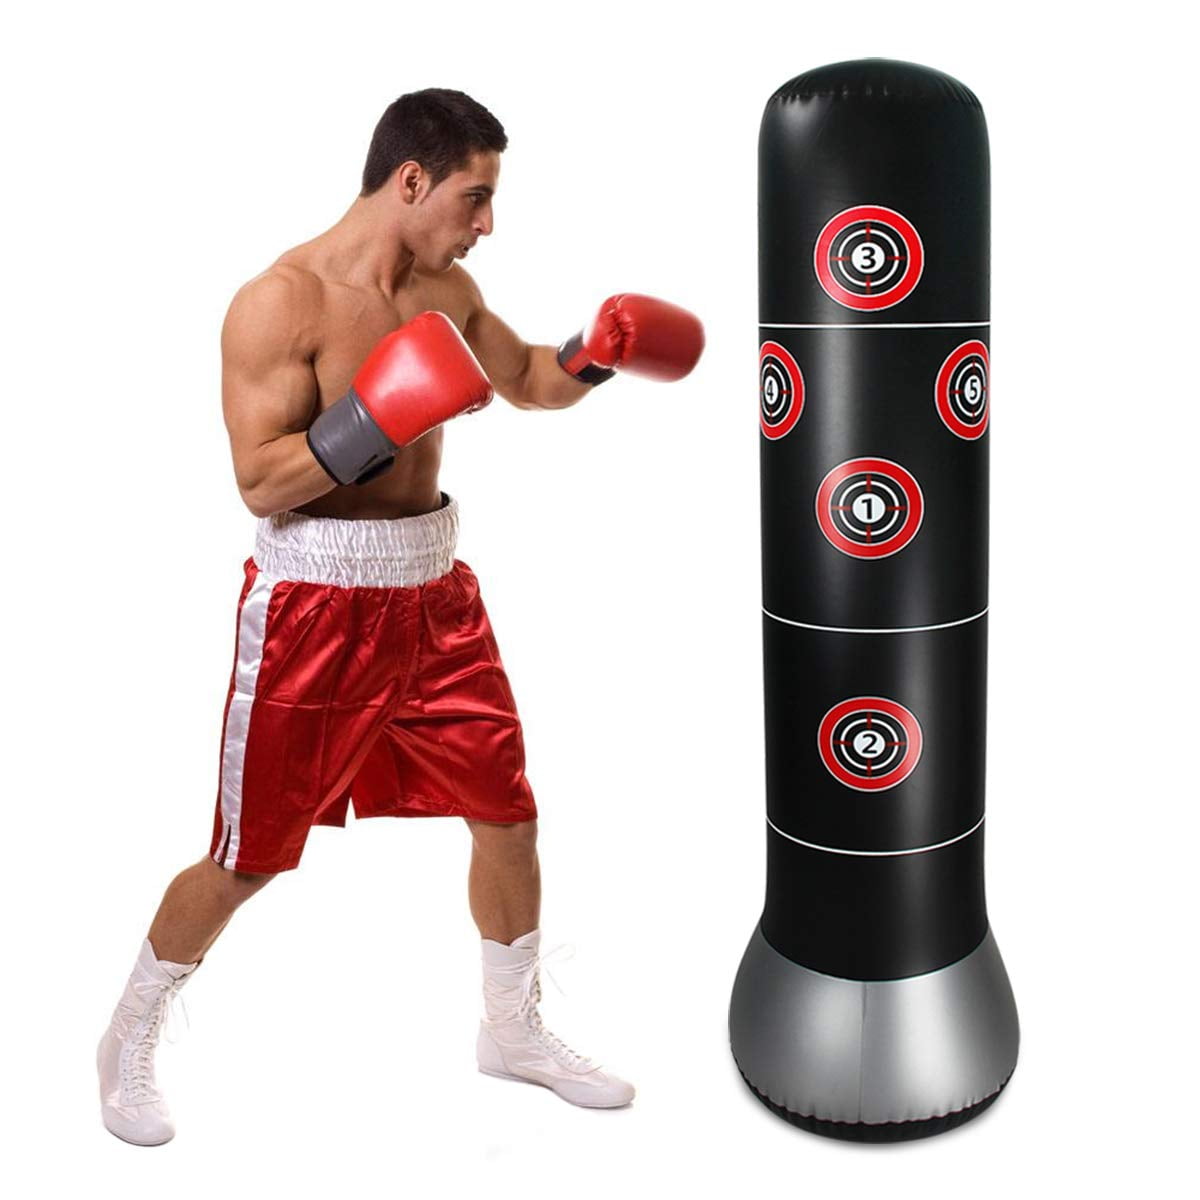 UFC Combat Strike Force Tracker Smart Device for Punching Bags Measure Speed 